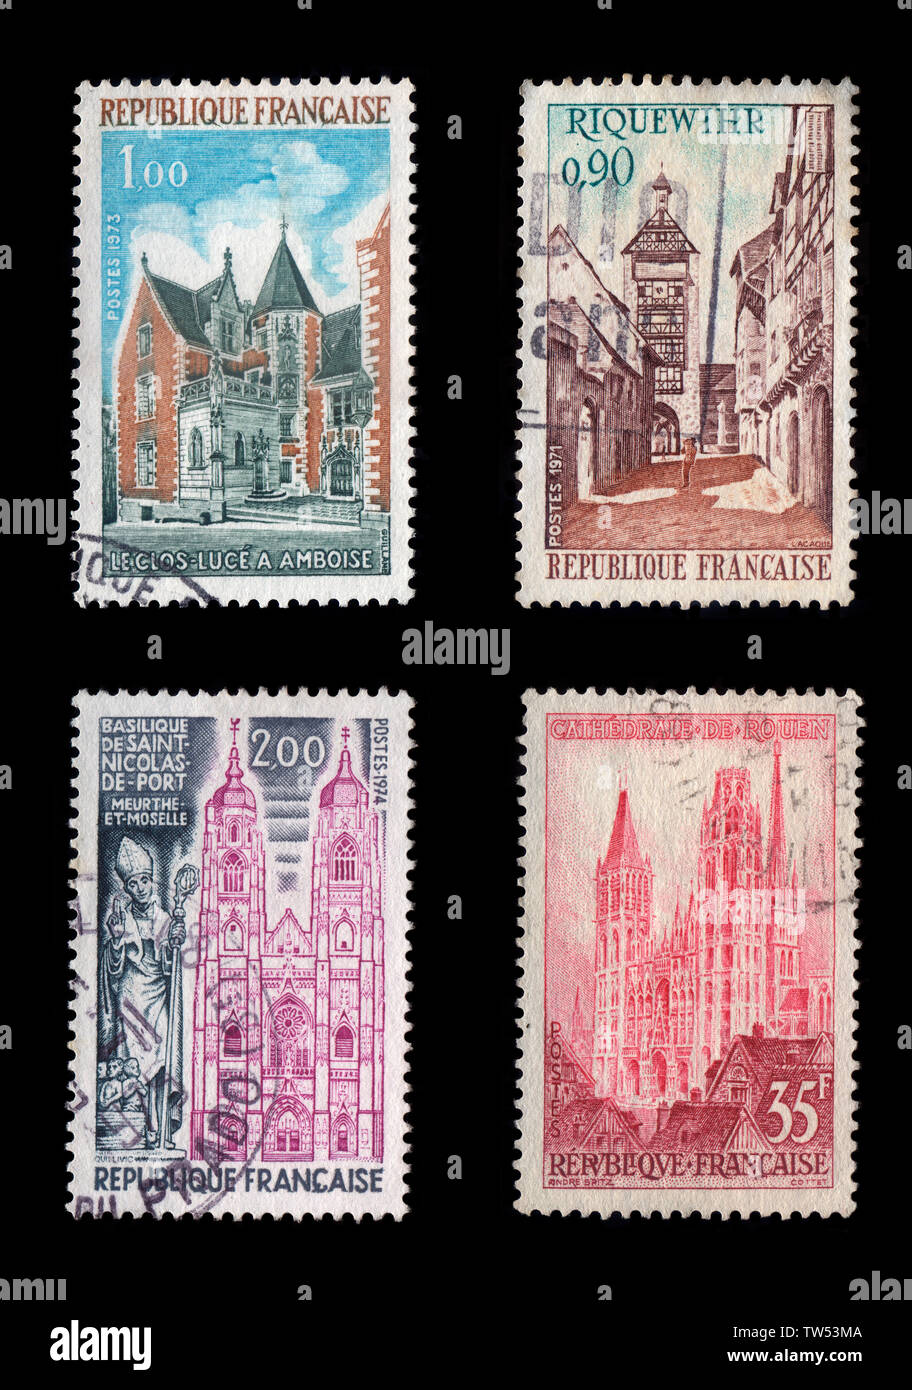 Postage Stamps of France (Isolated on black background) Stock Photo